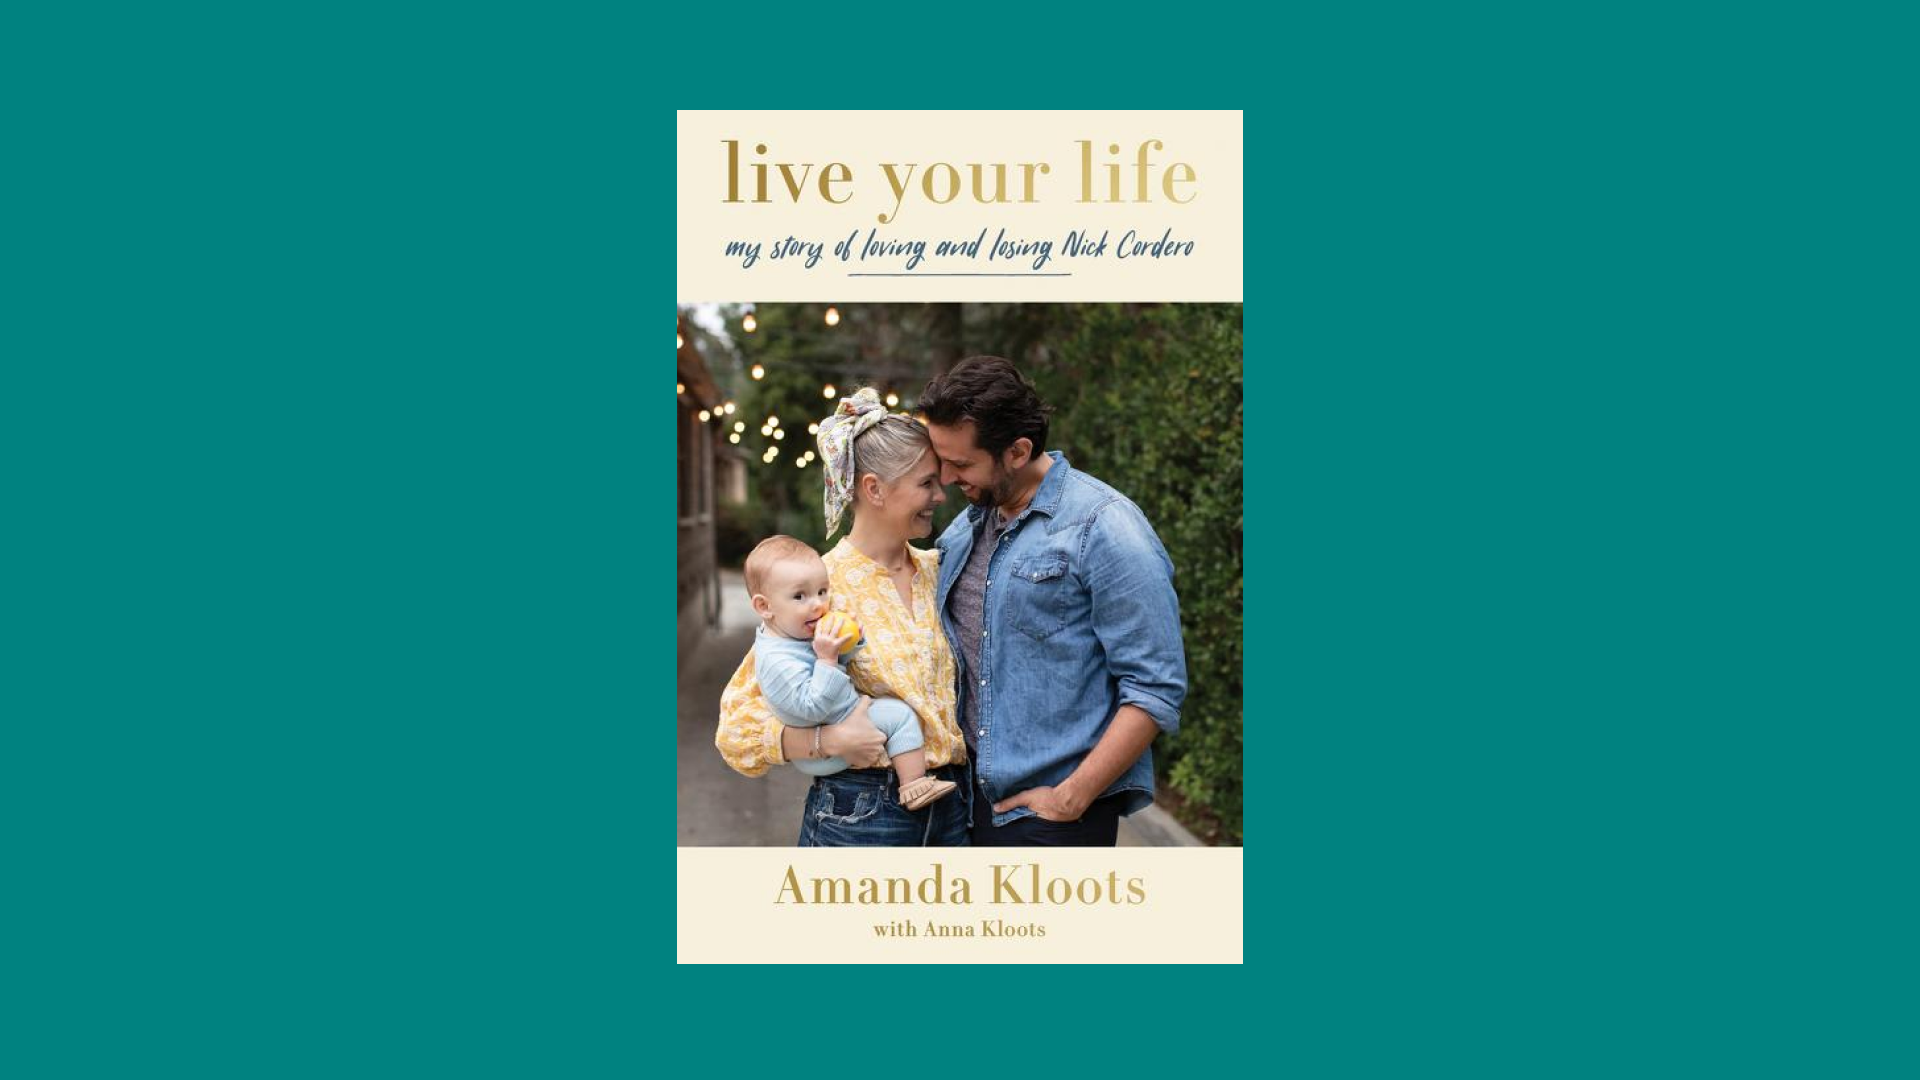 “Live Your Life” by Amanda Kloots and Anna Kloots